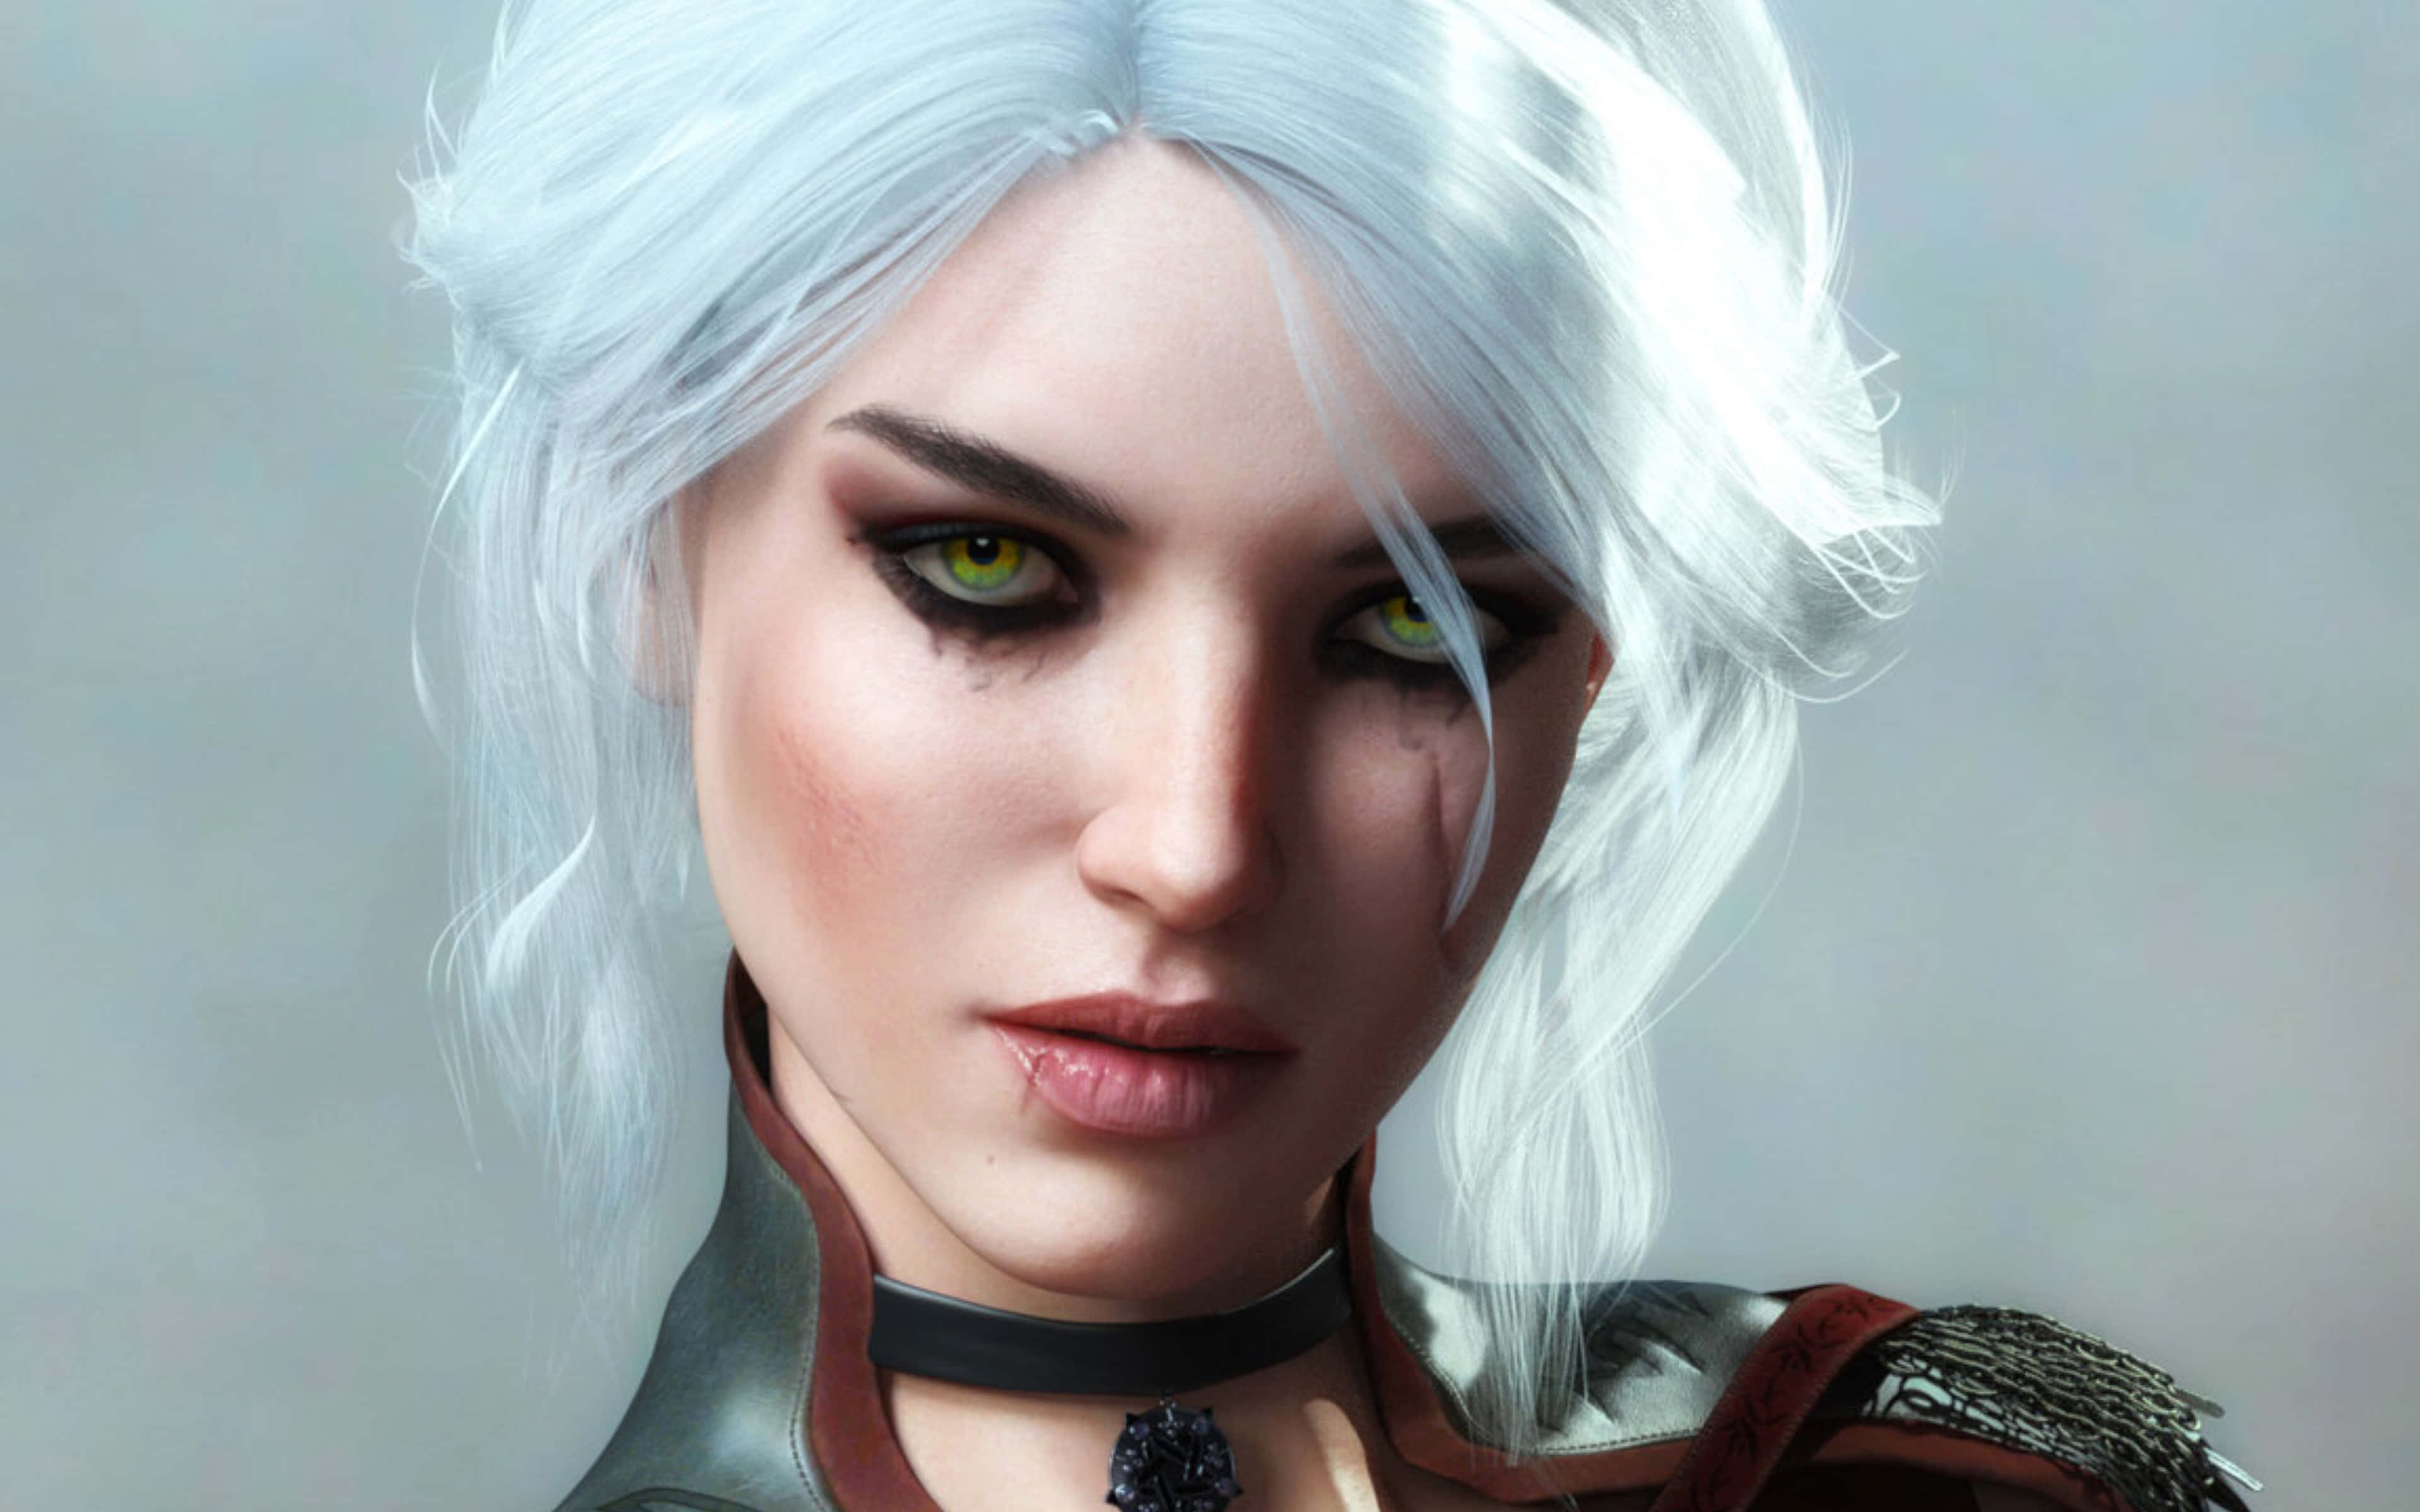 Ciri In Combat - A Riveting Image Of The Witcher's Lethal Lady Wallpaper